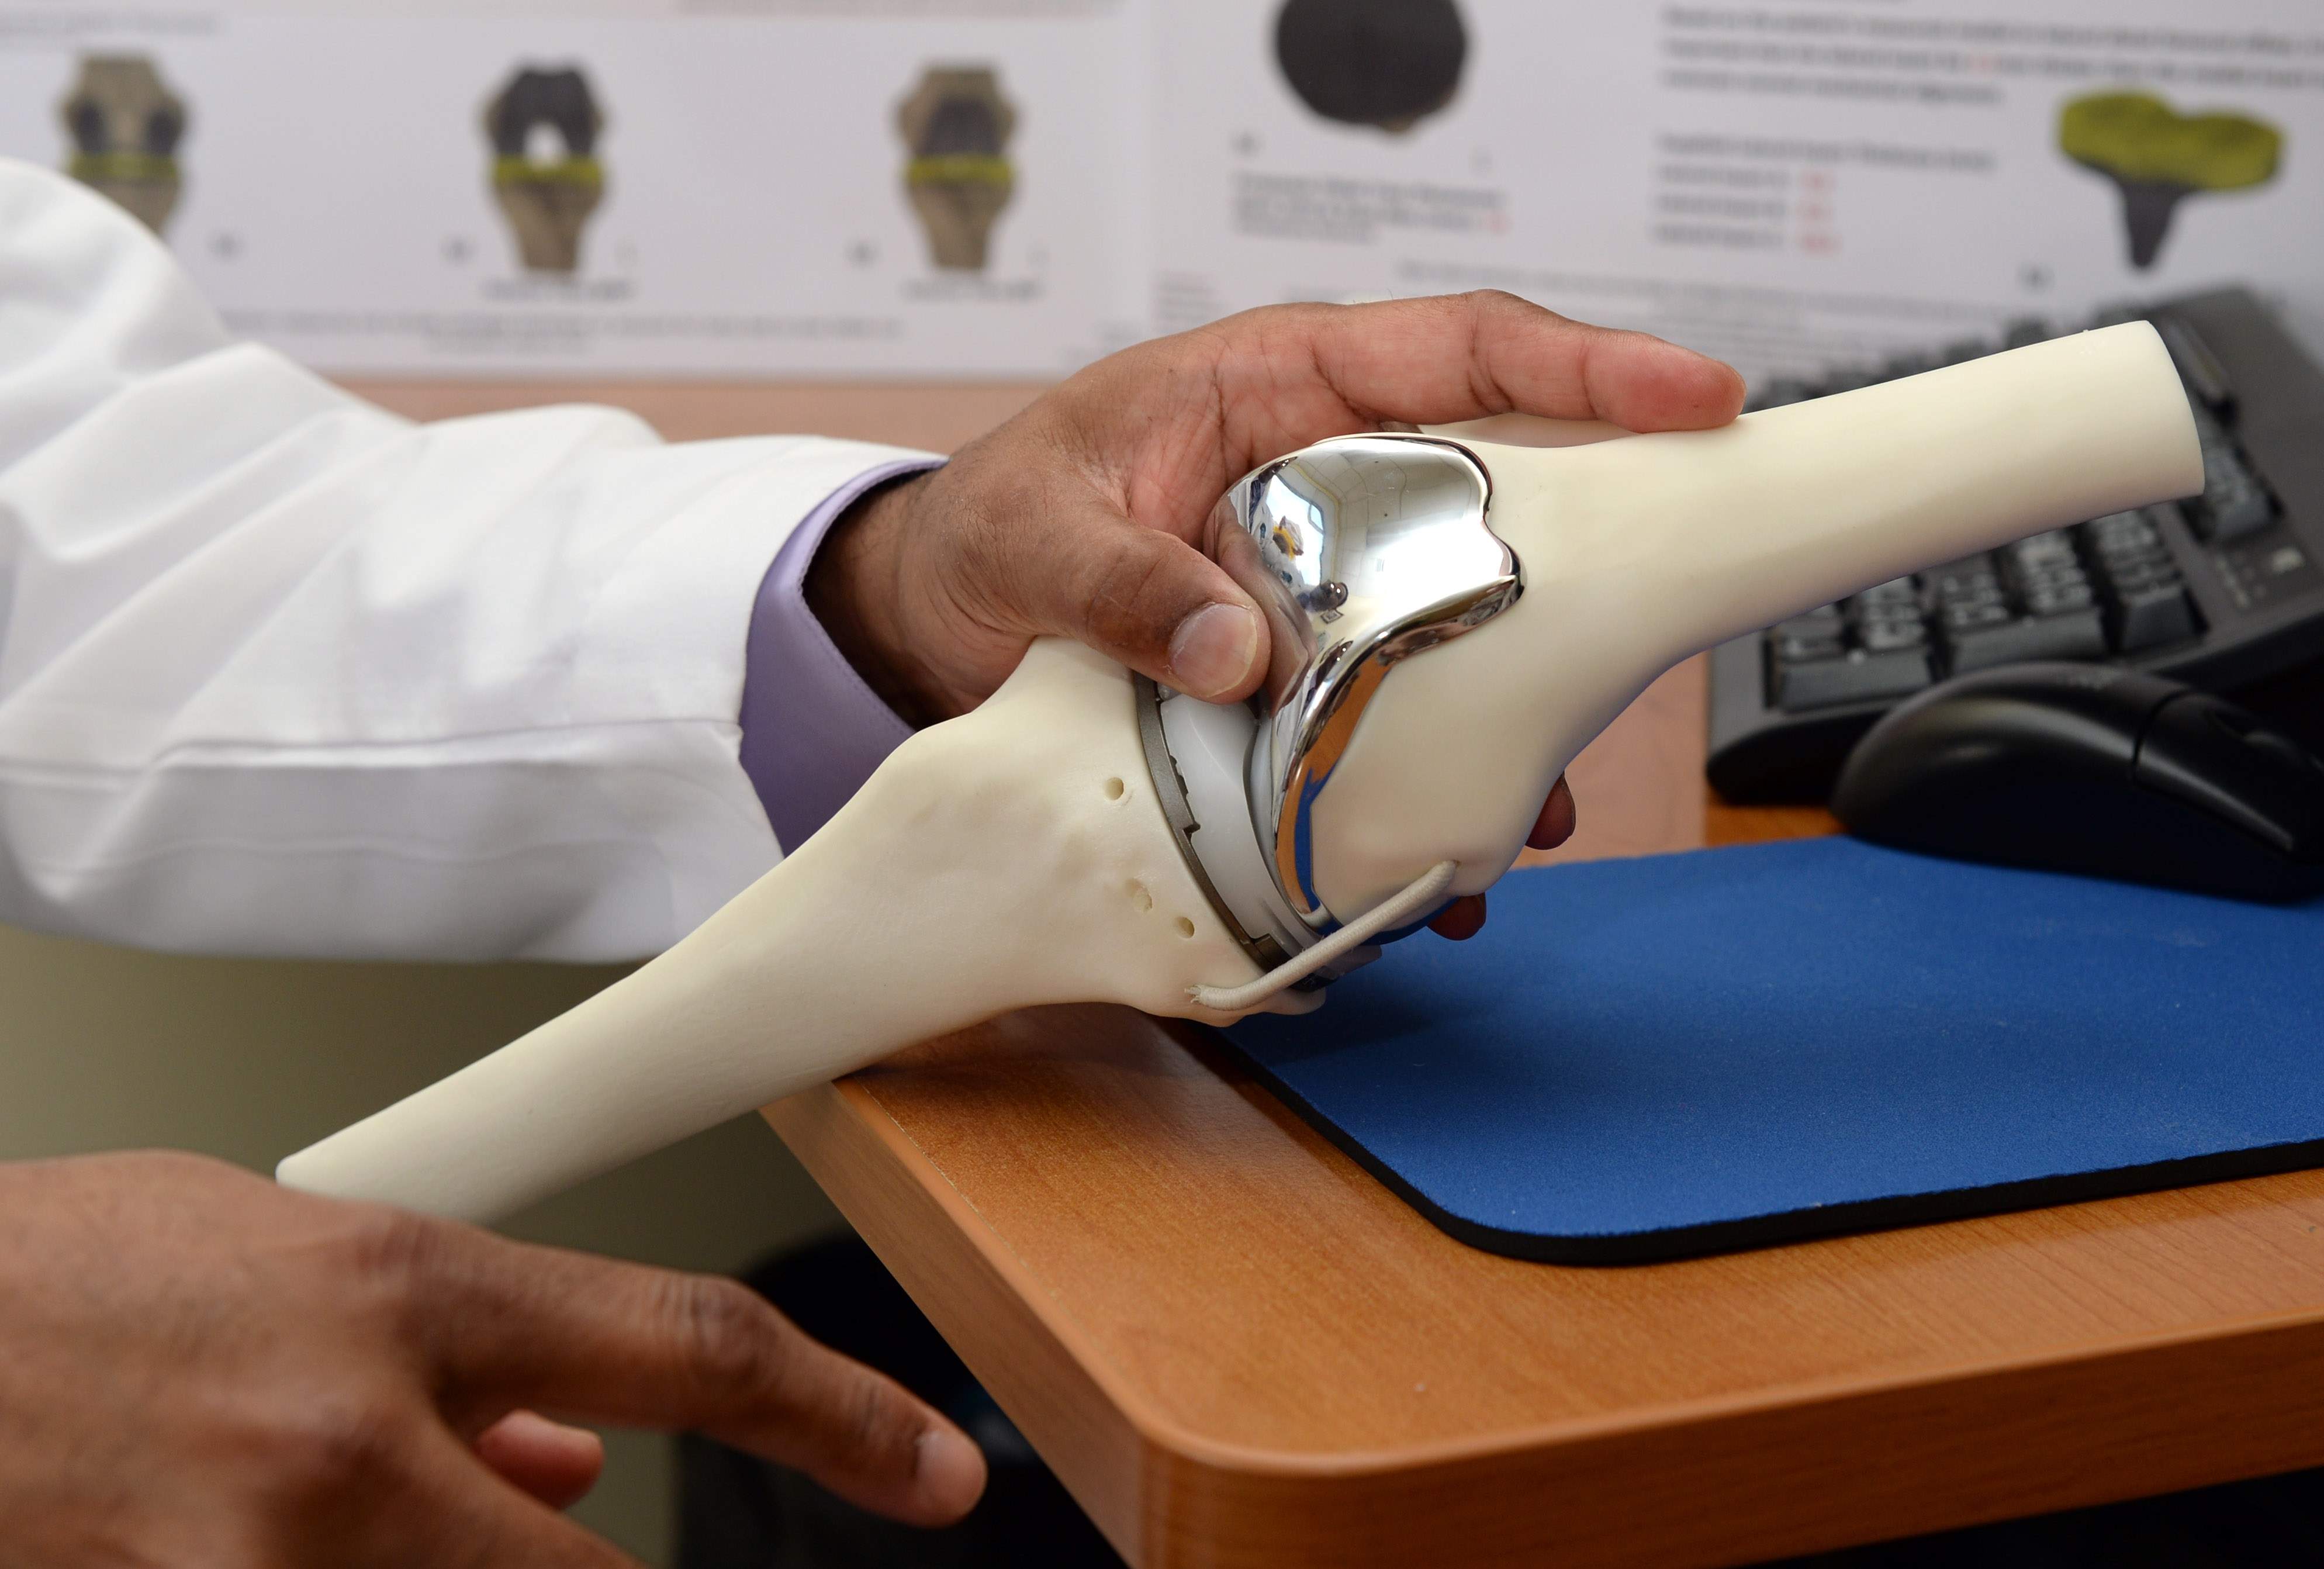 3D Printed Knee Replacement Surgery Enables 85-year-old Woman to Walk ... - Knee2